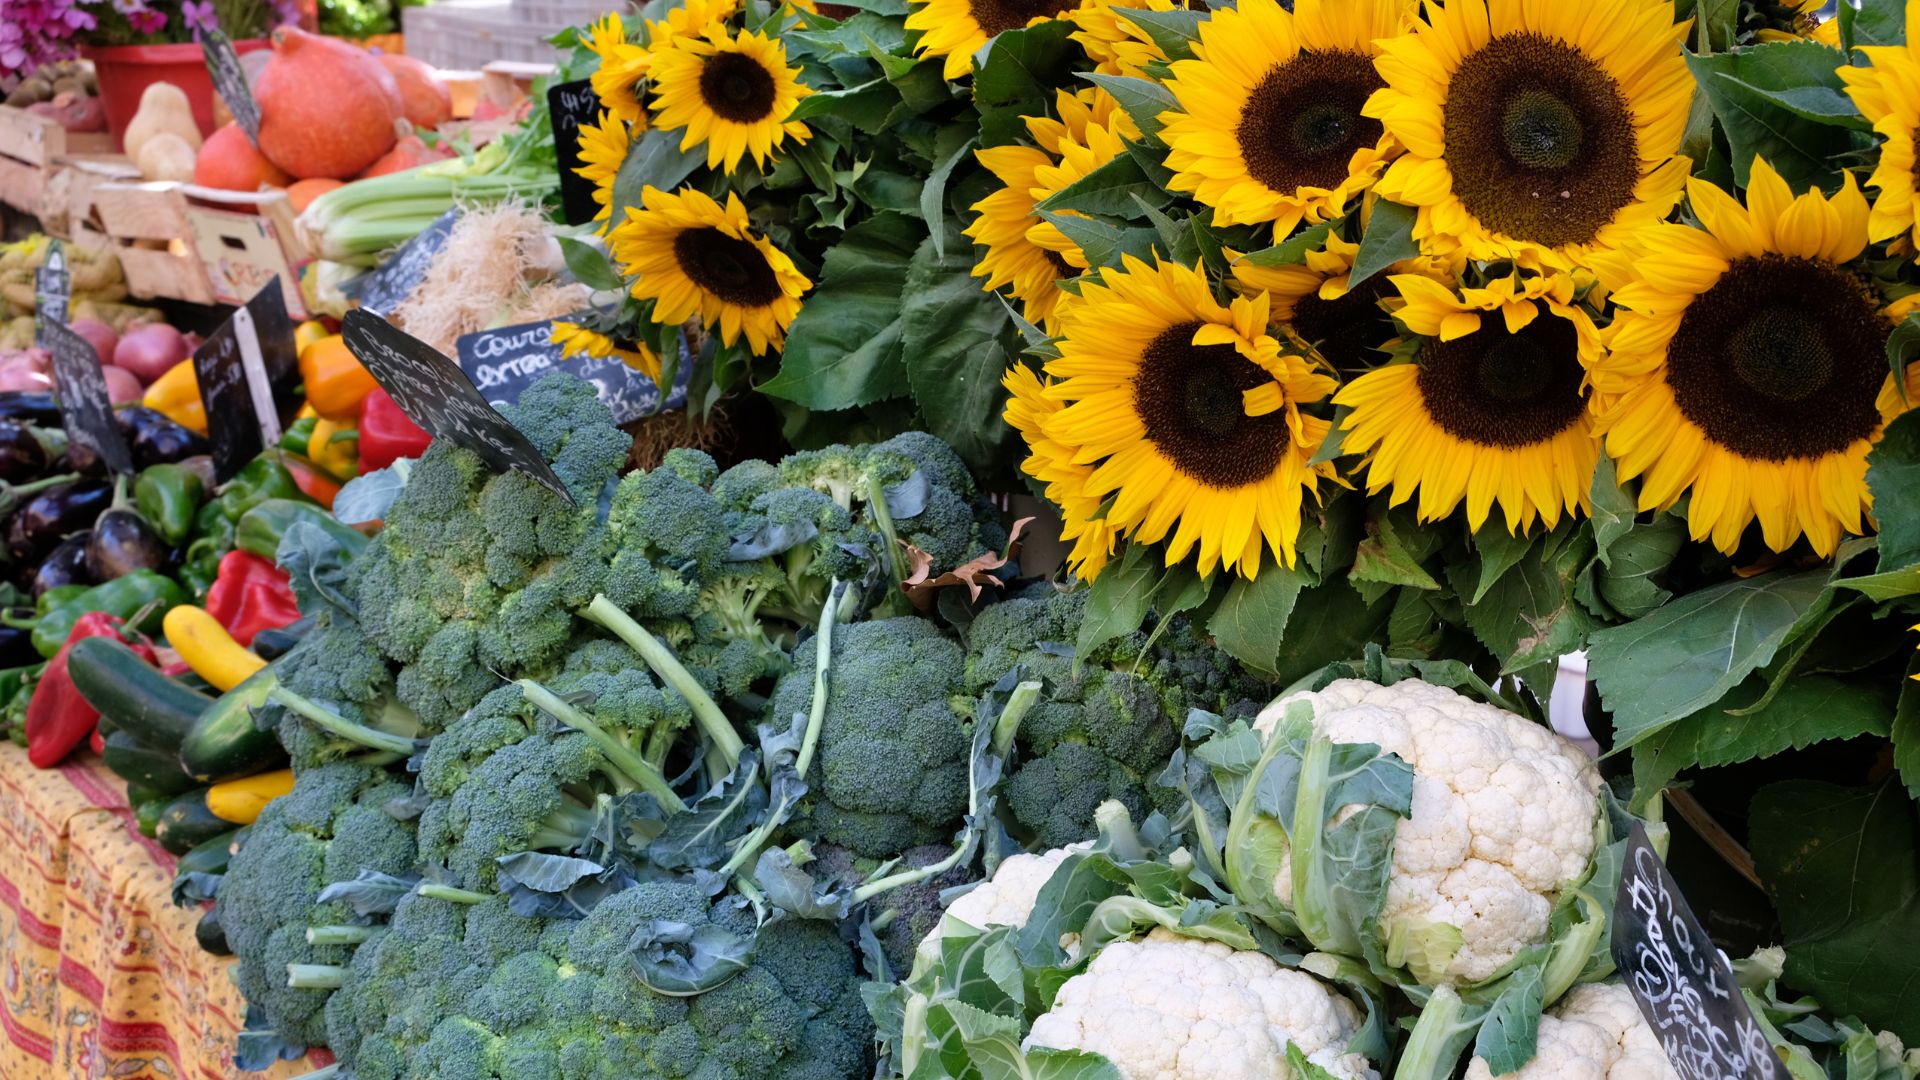 Photo of produce and flowers at a farmer's market.